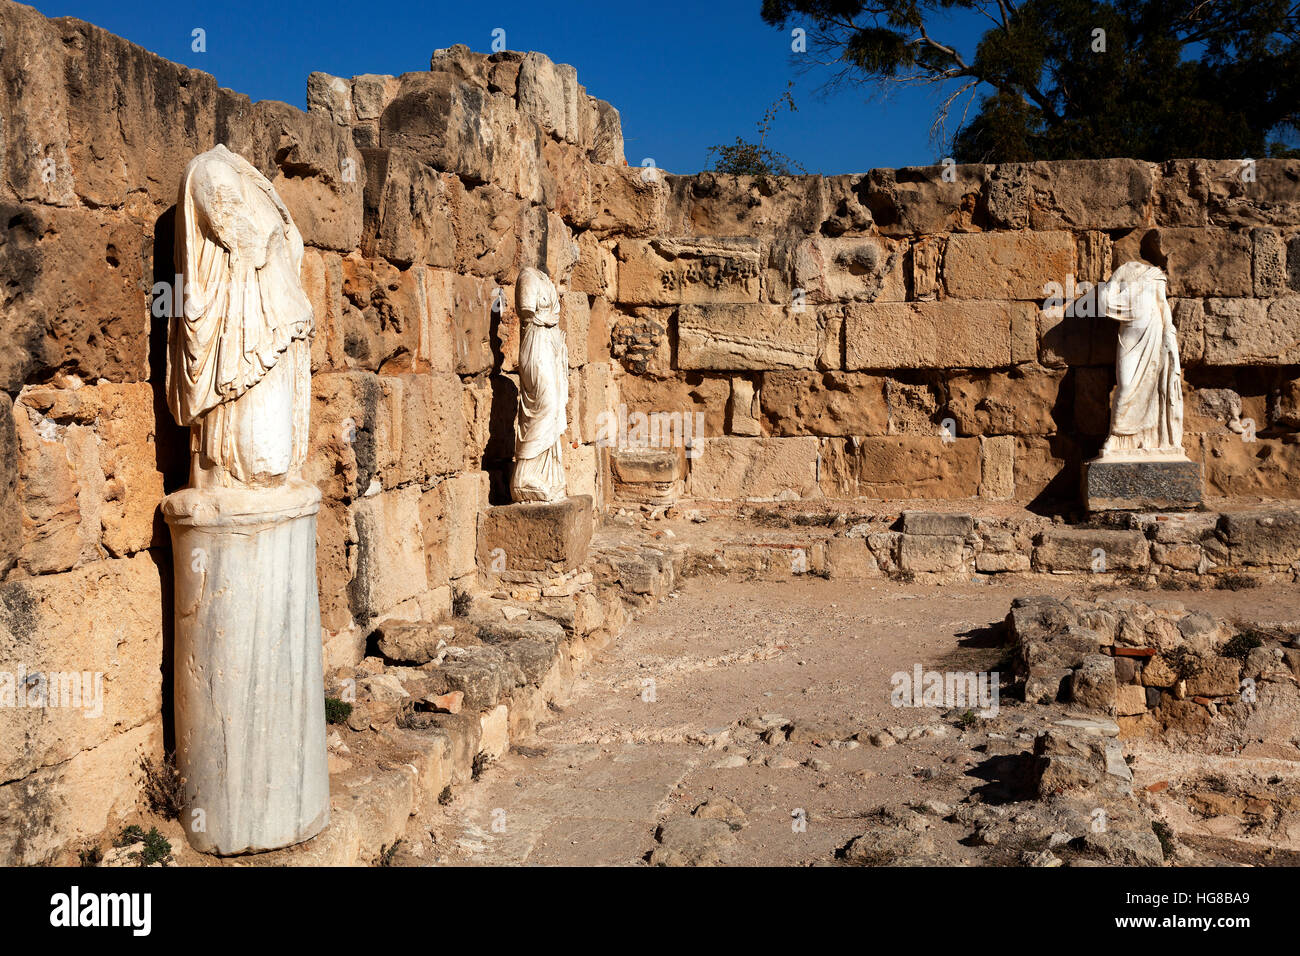 Ancient headless statues, archeological site, ancient city of Salamis, Famagusta, Northern Cyprus, Cyprus Stock Photo